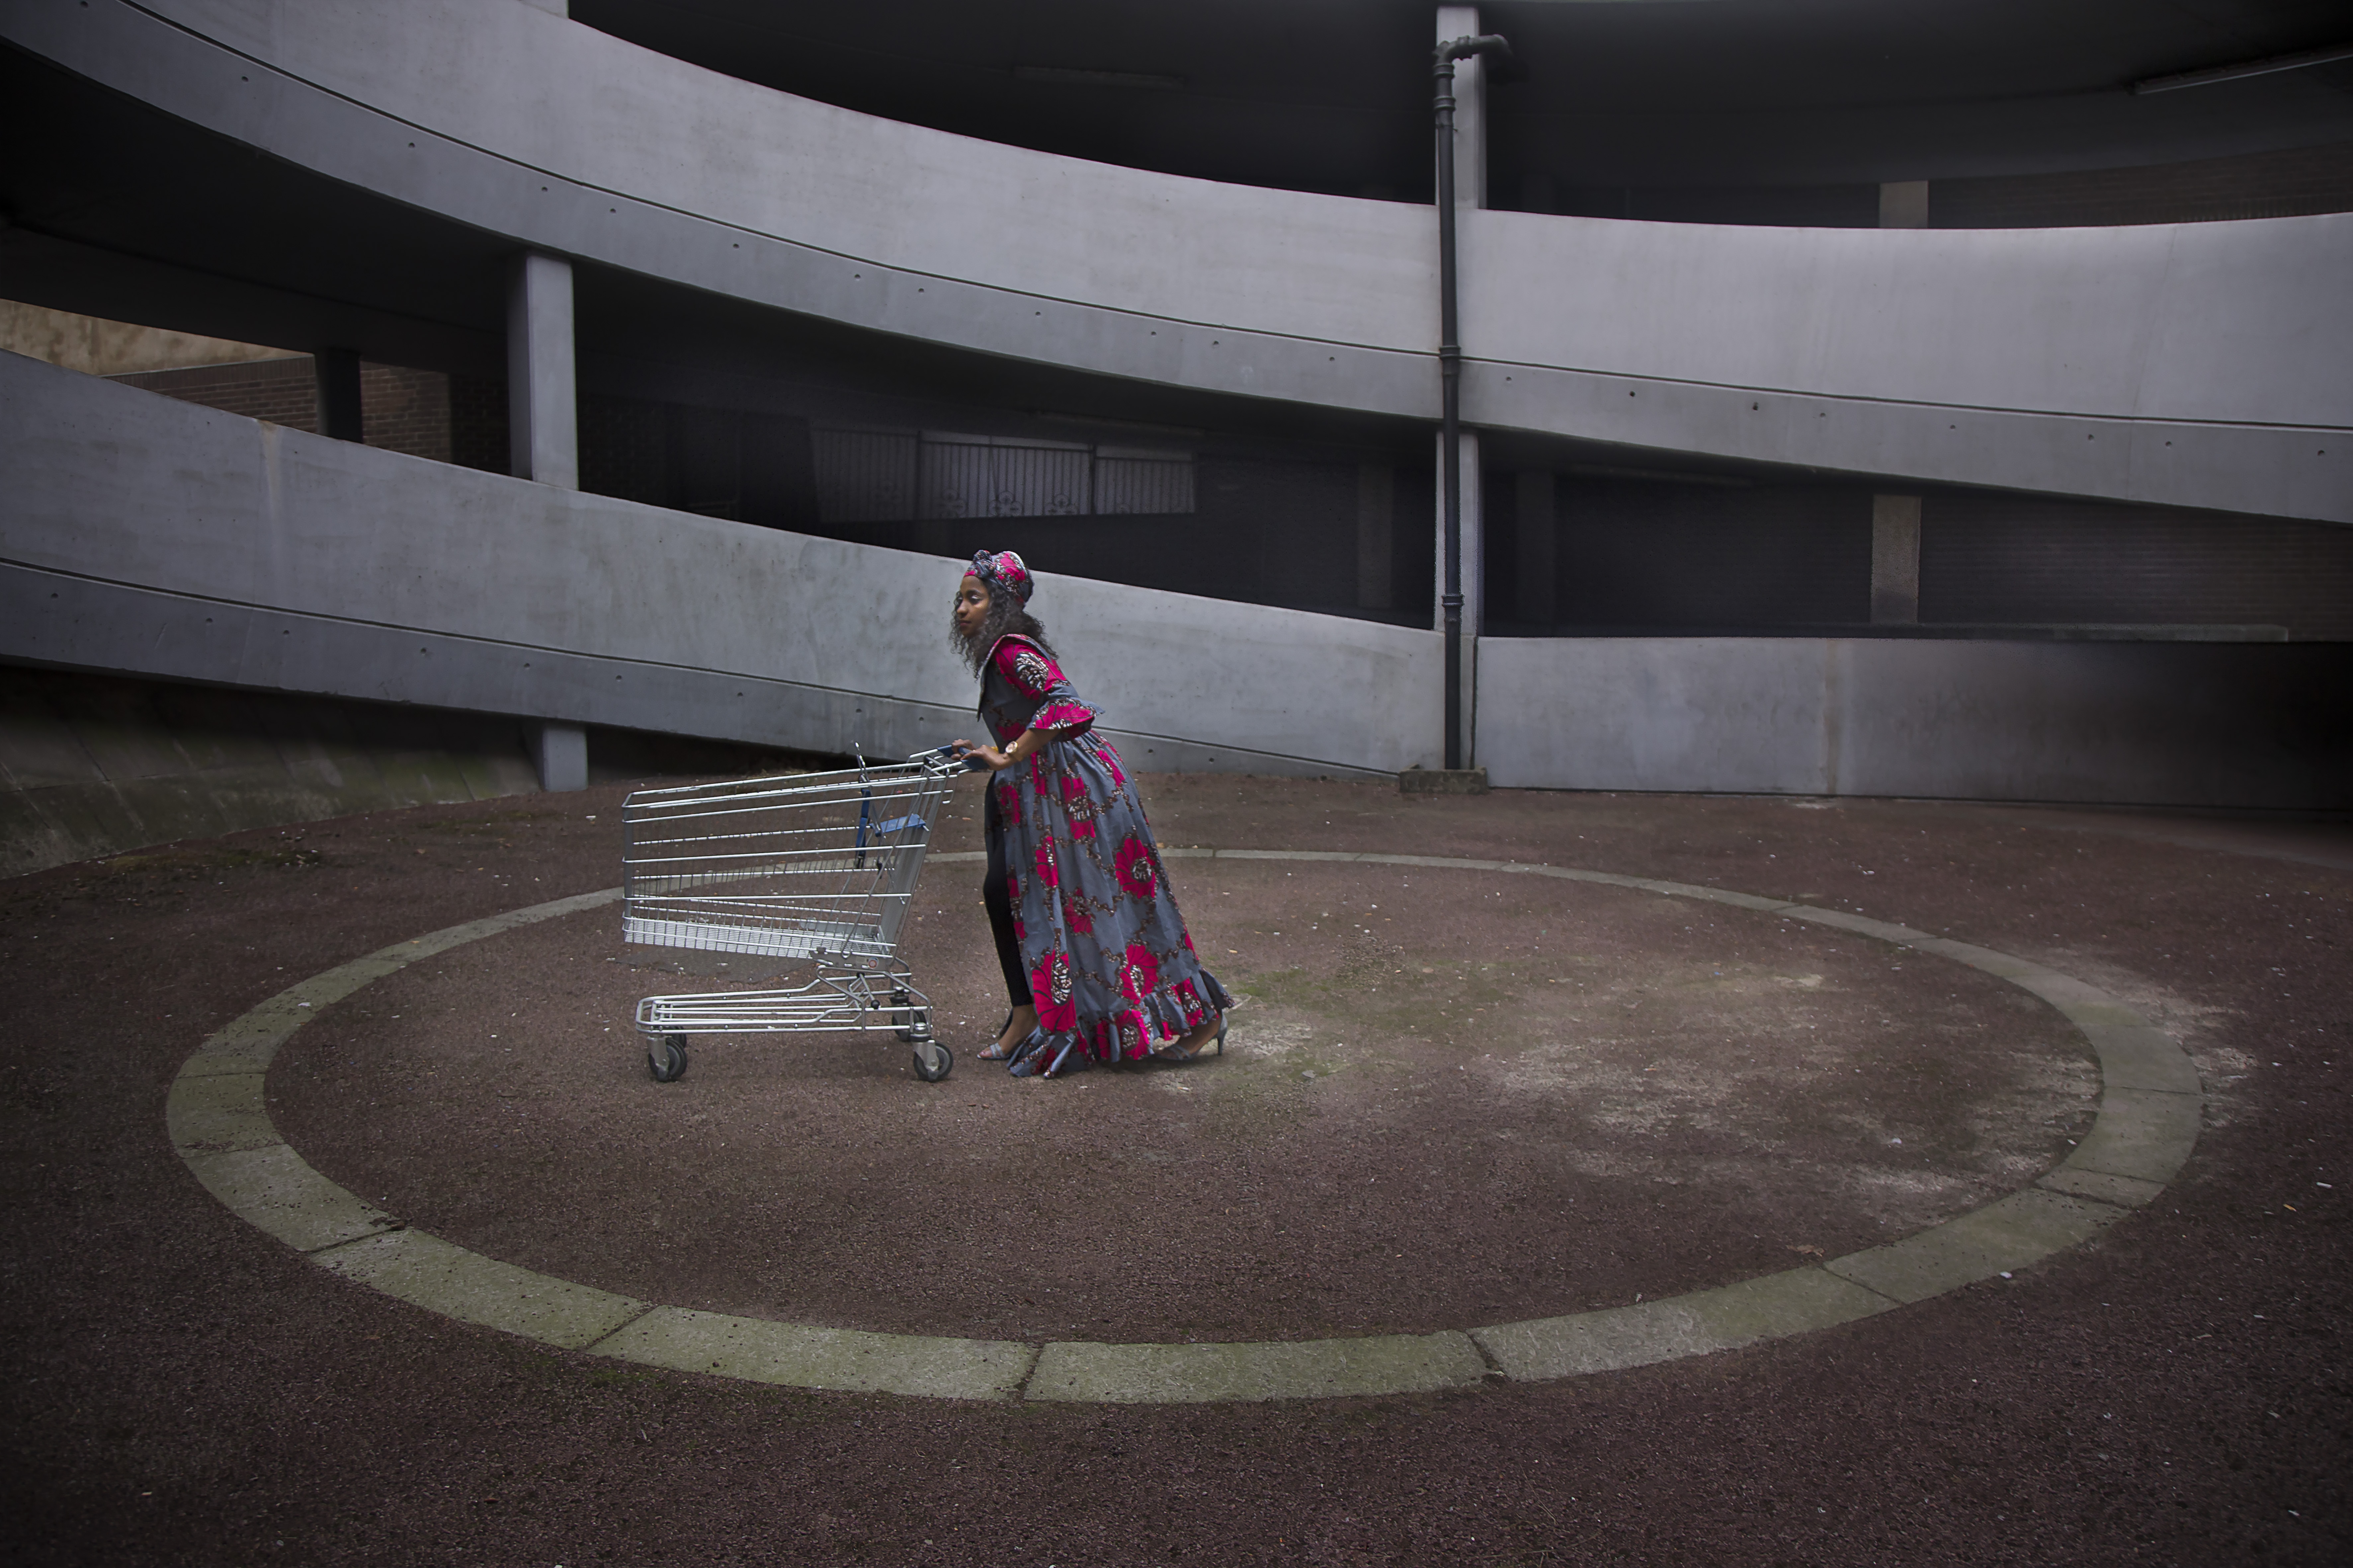 A women in a long pink and grey coat and strappy silver sandals pushes a shopping trolley across the centre of a spiraling concrete ramp